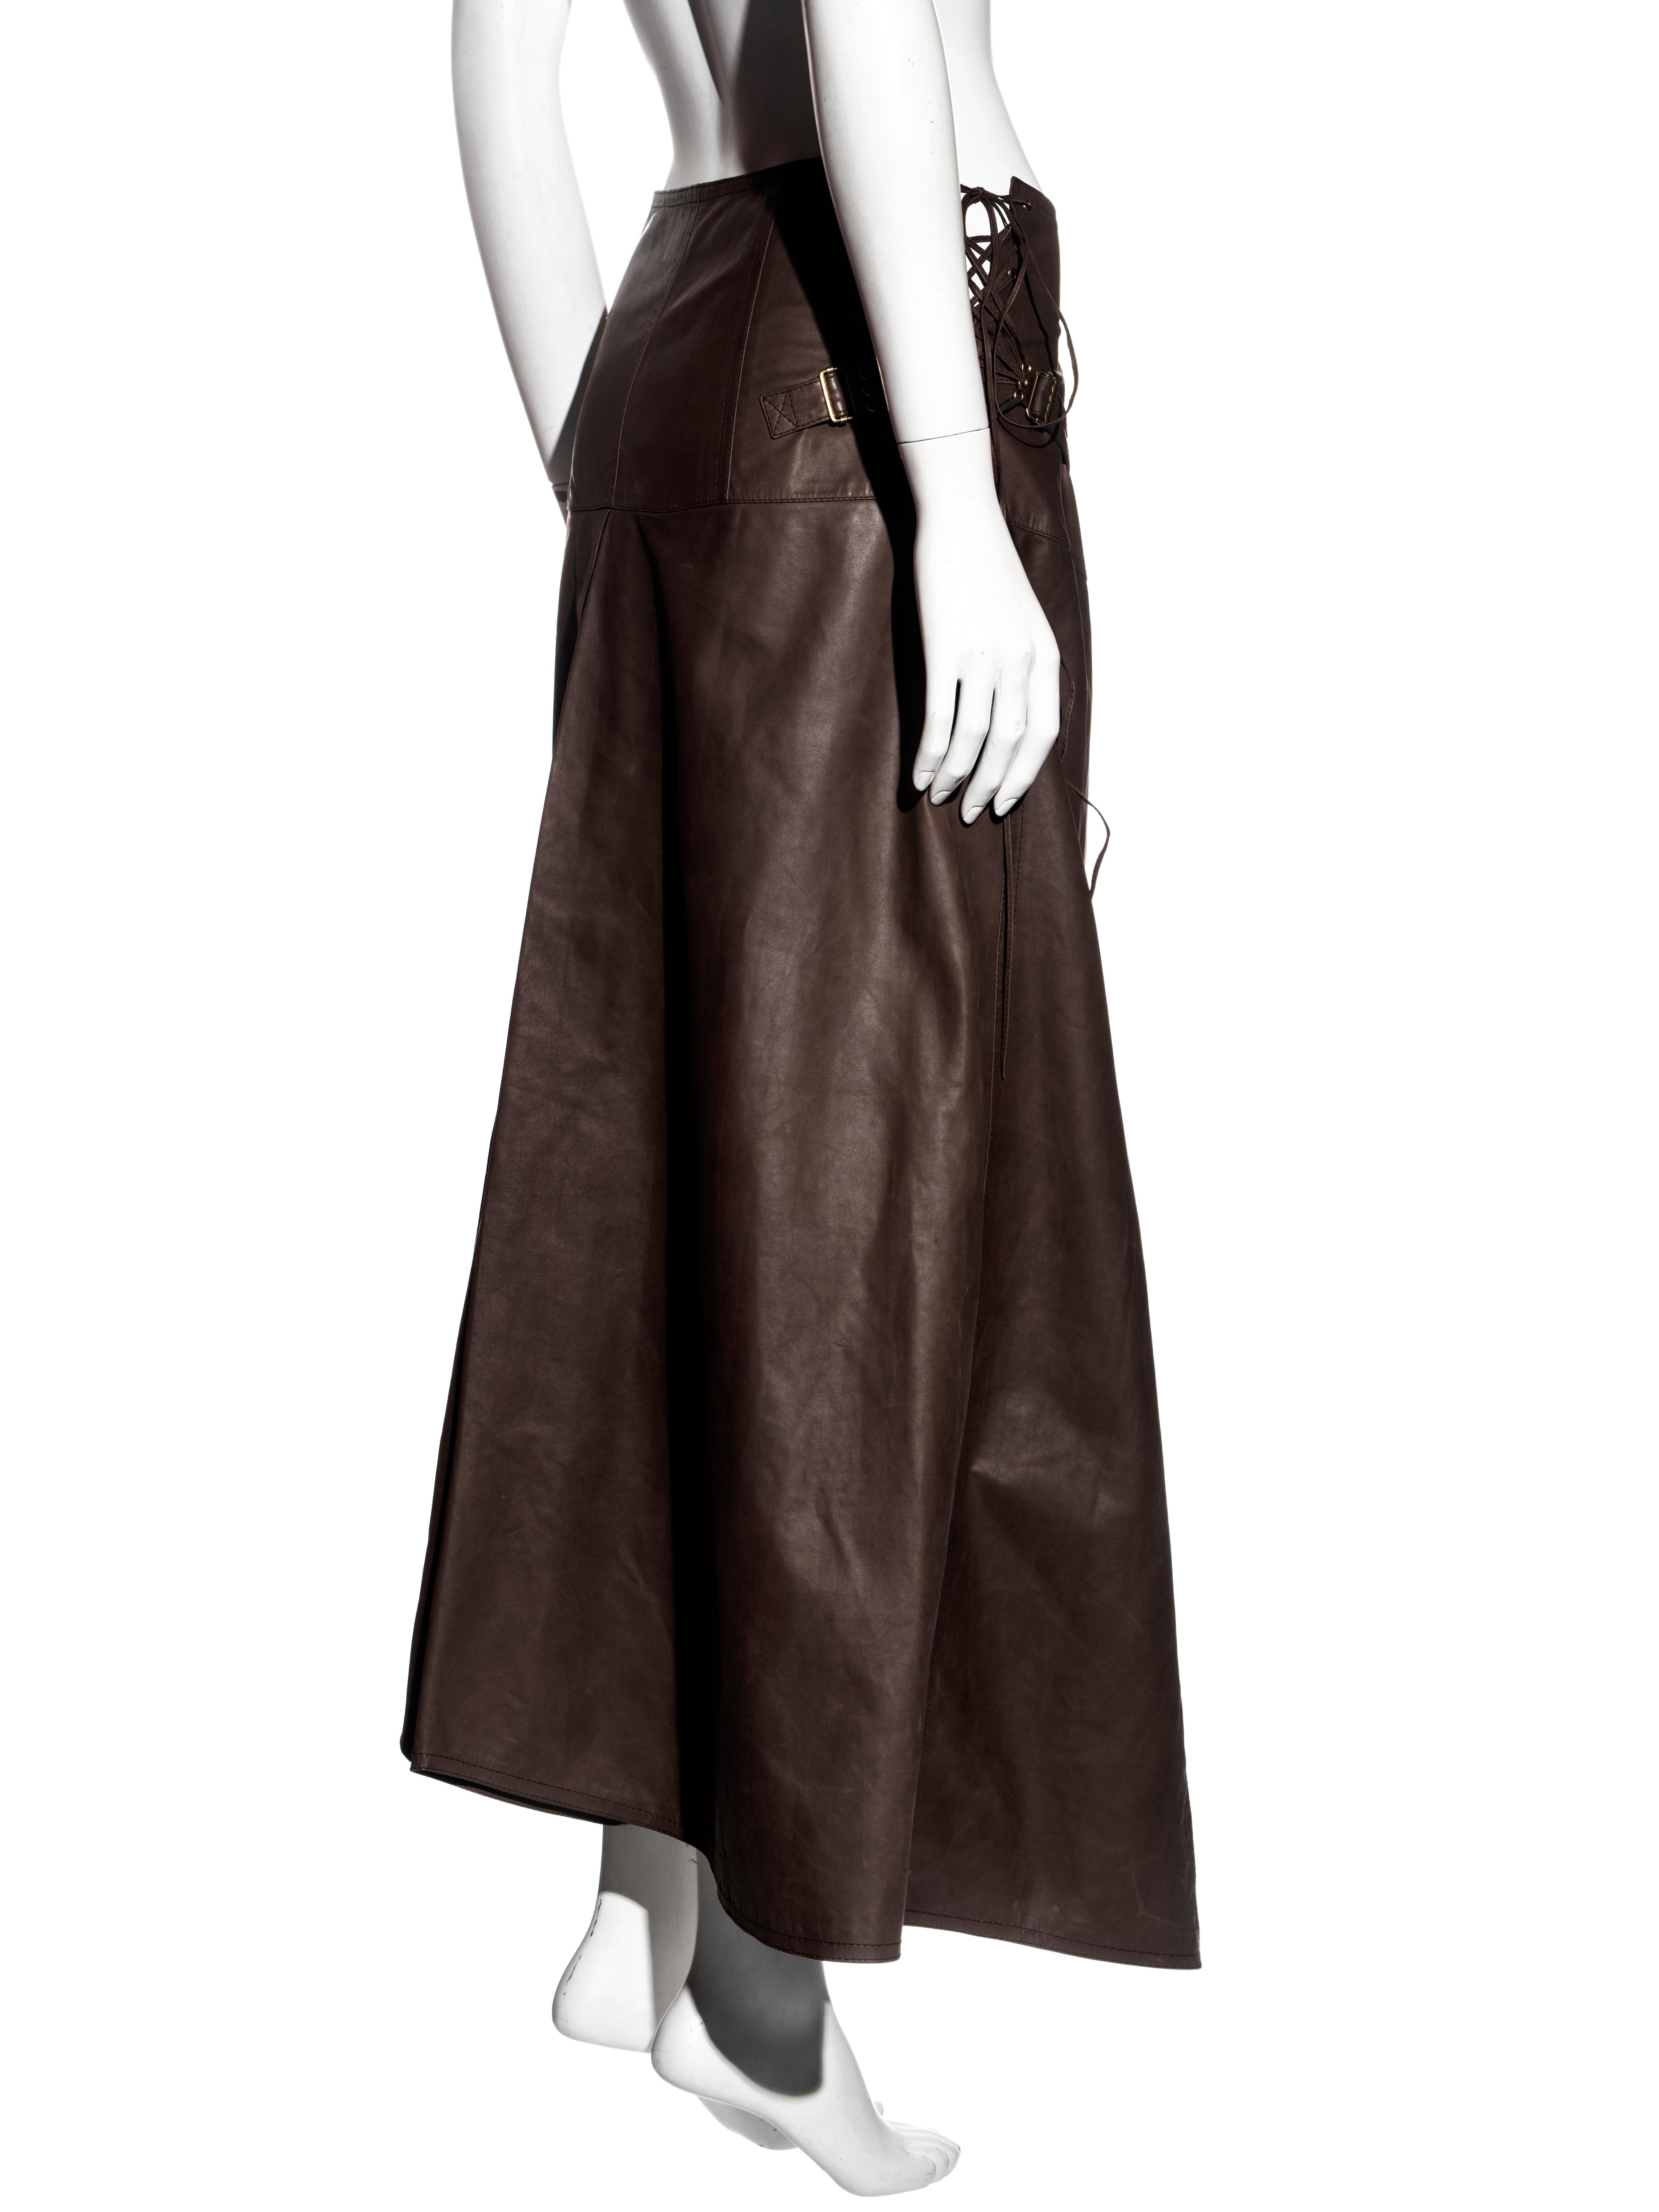 Christian Dior by John Galliano brown leather wrap skirt, ss 2001 3